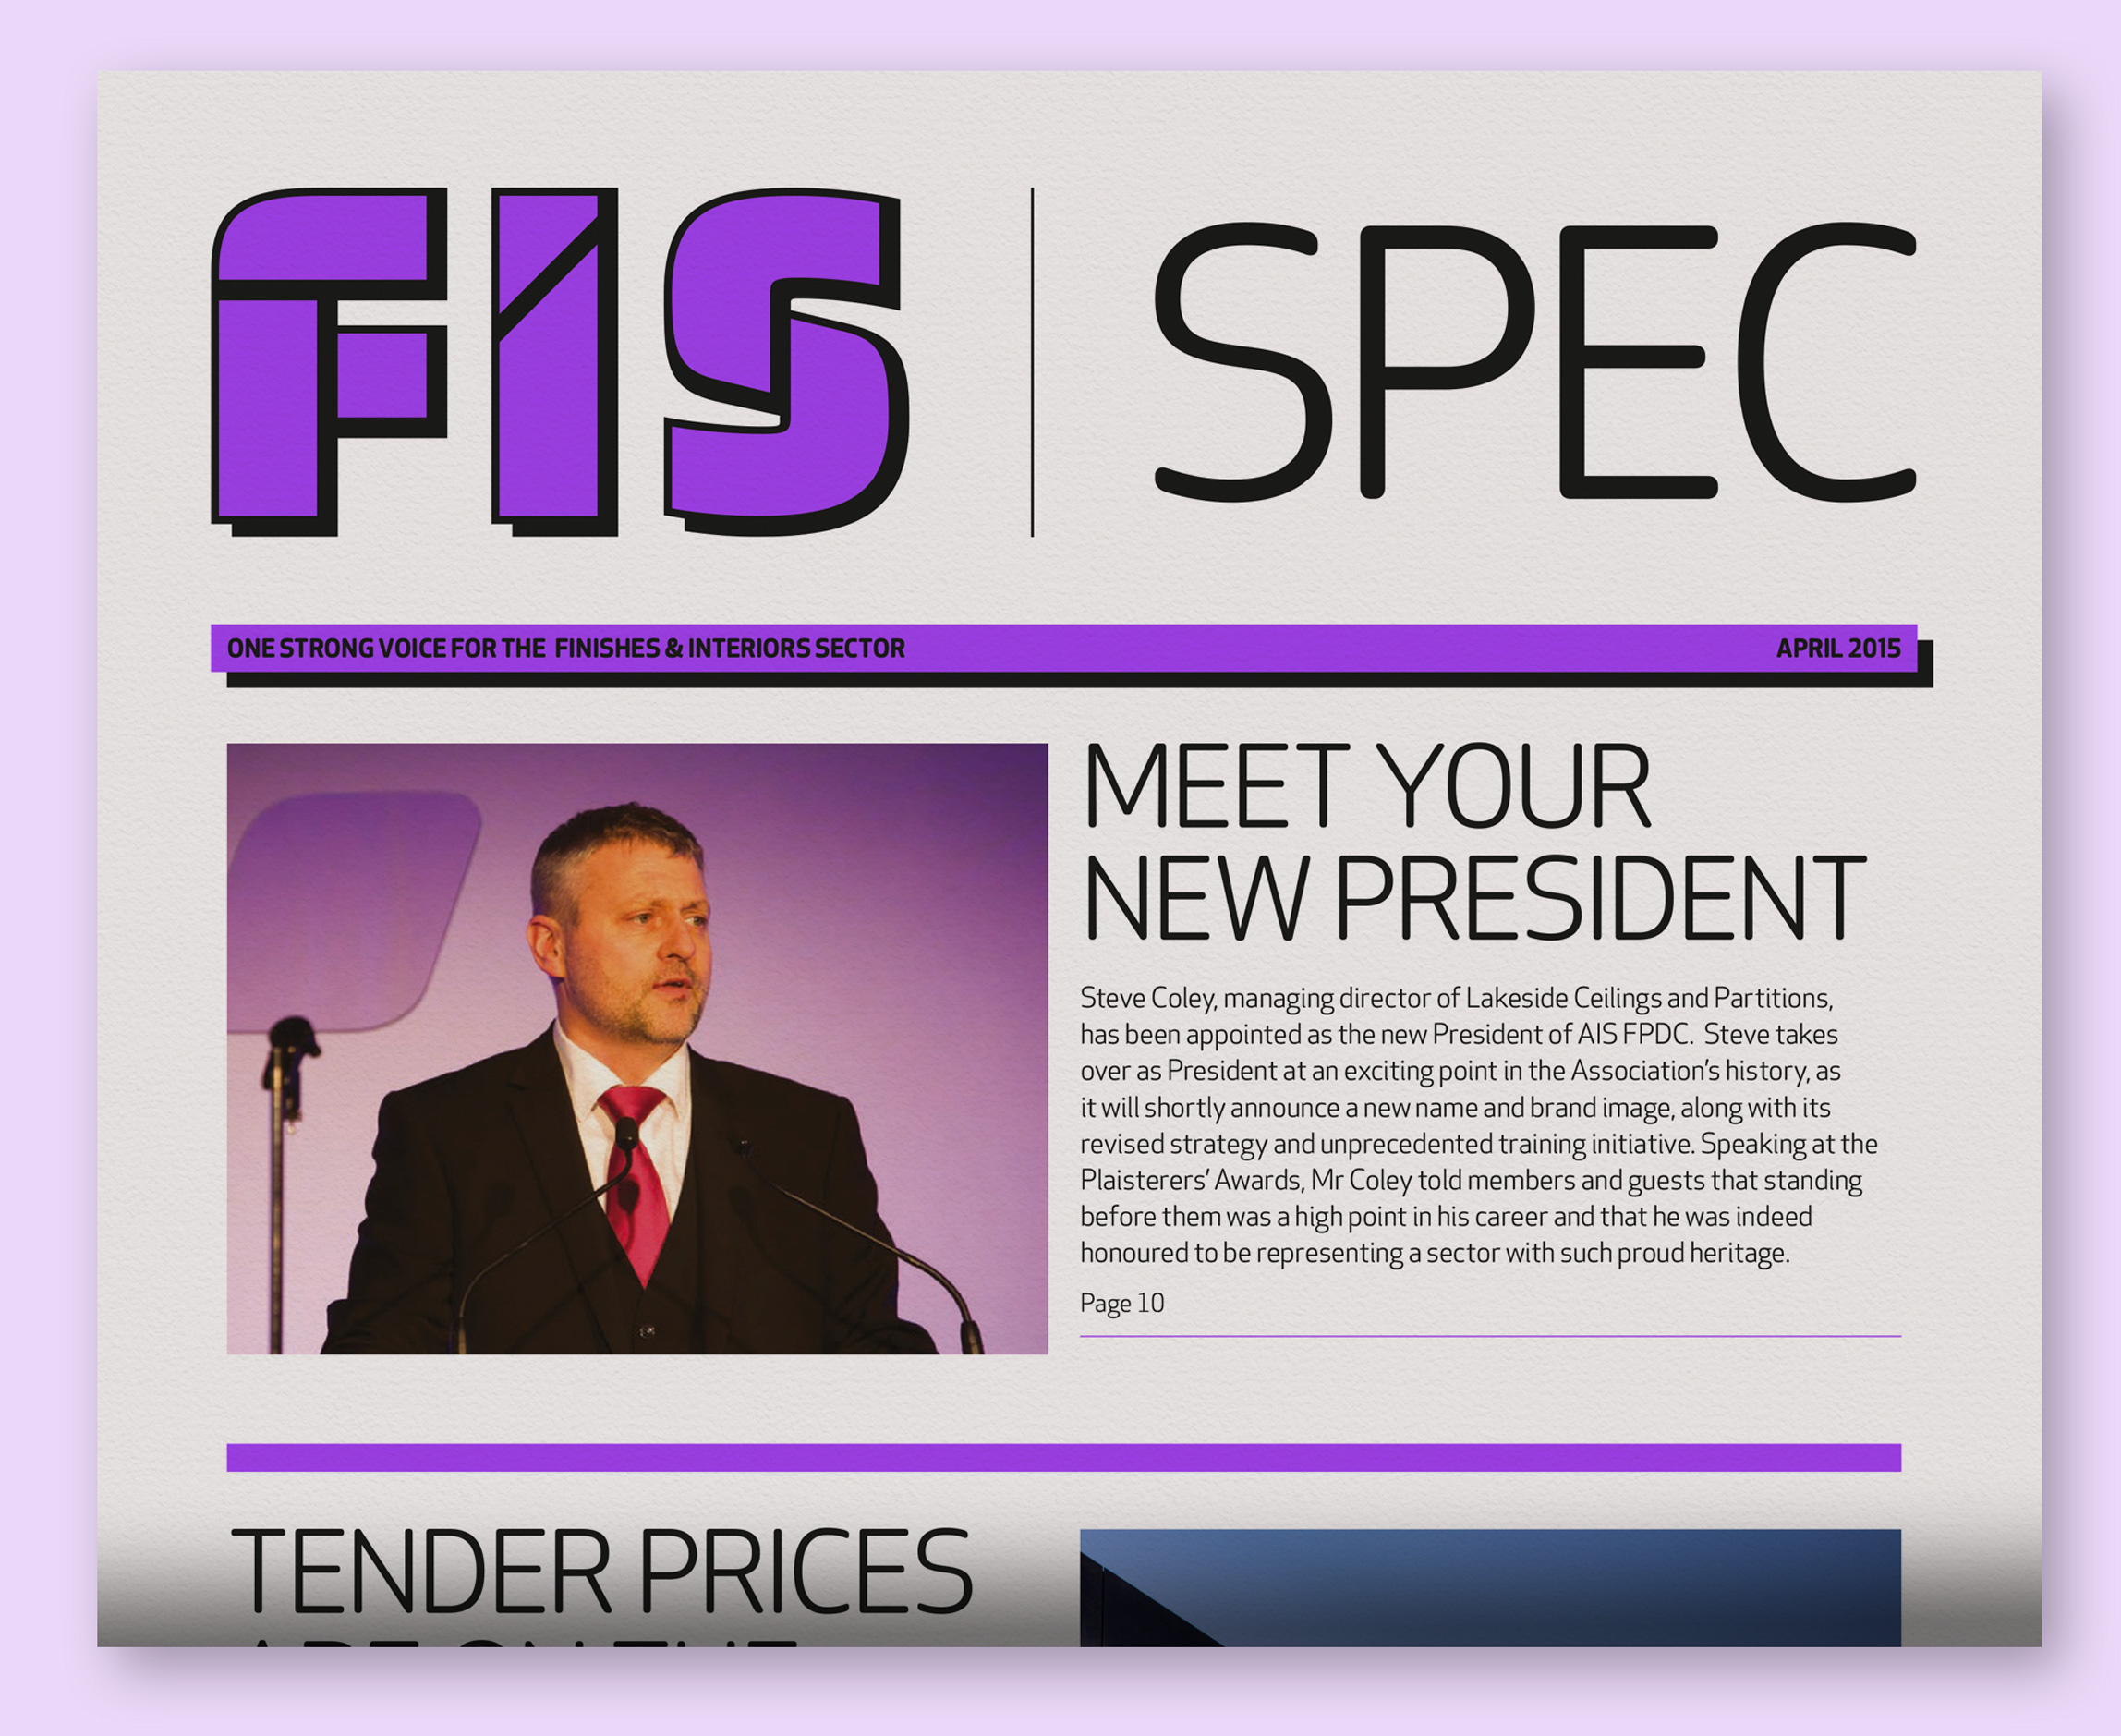 FIS finishes and interiors sector rebrand magazine FIS Spec